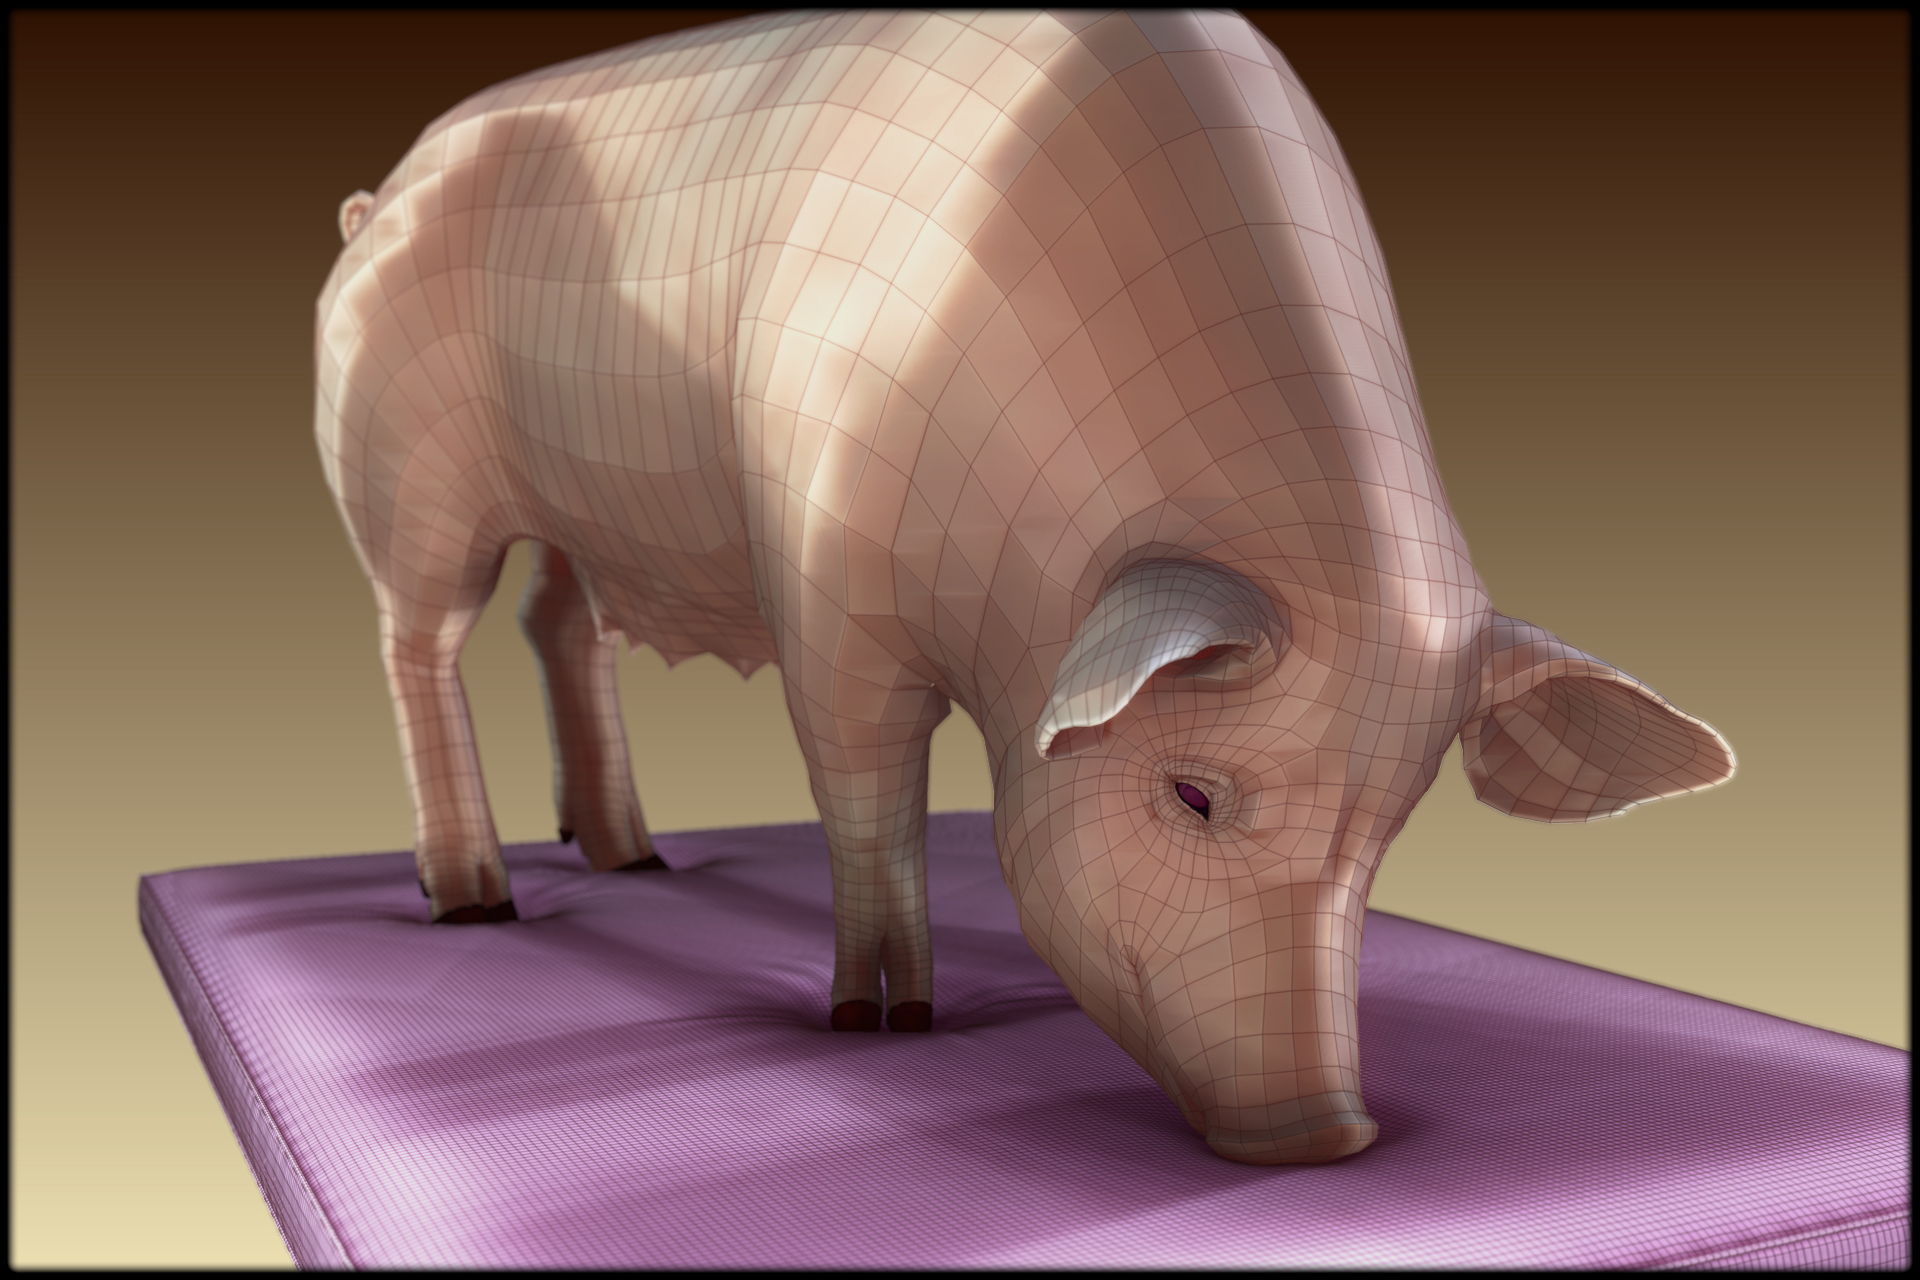 Pig_ZoomIn_Wireframe_02_Compo(0-00-02-14).jpg